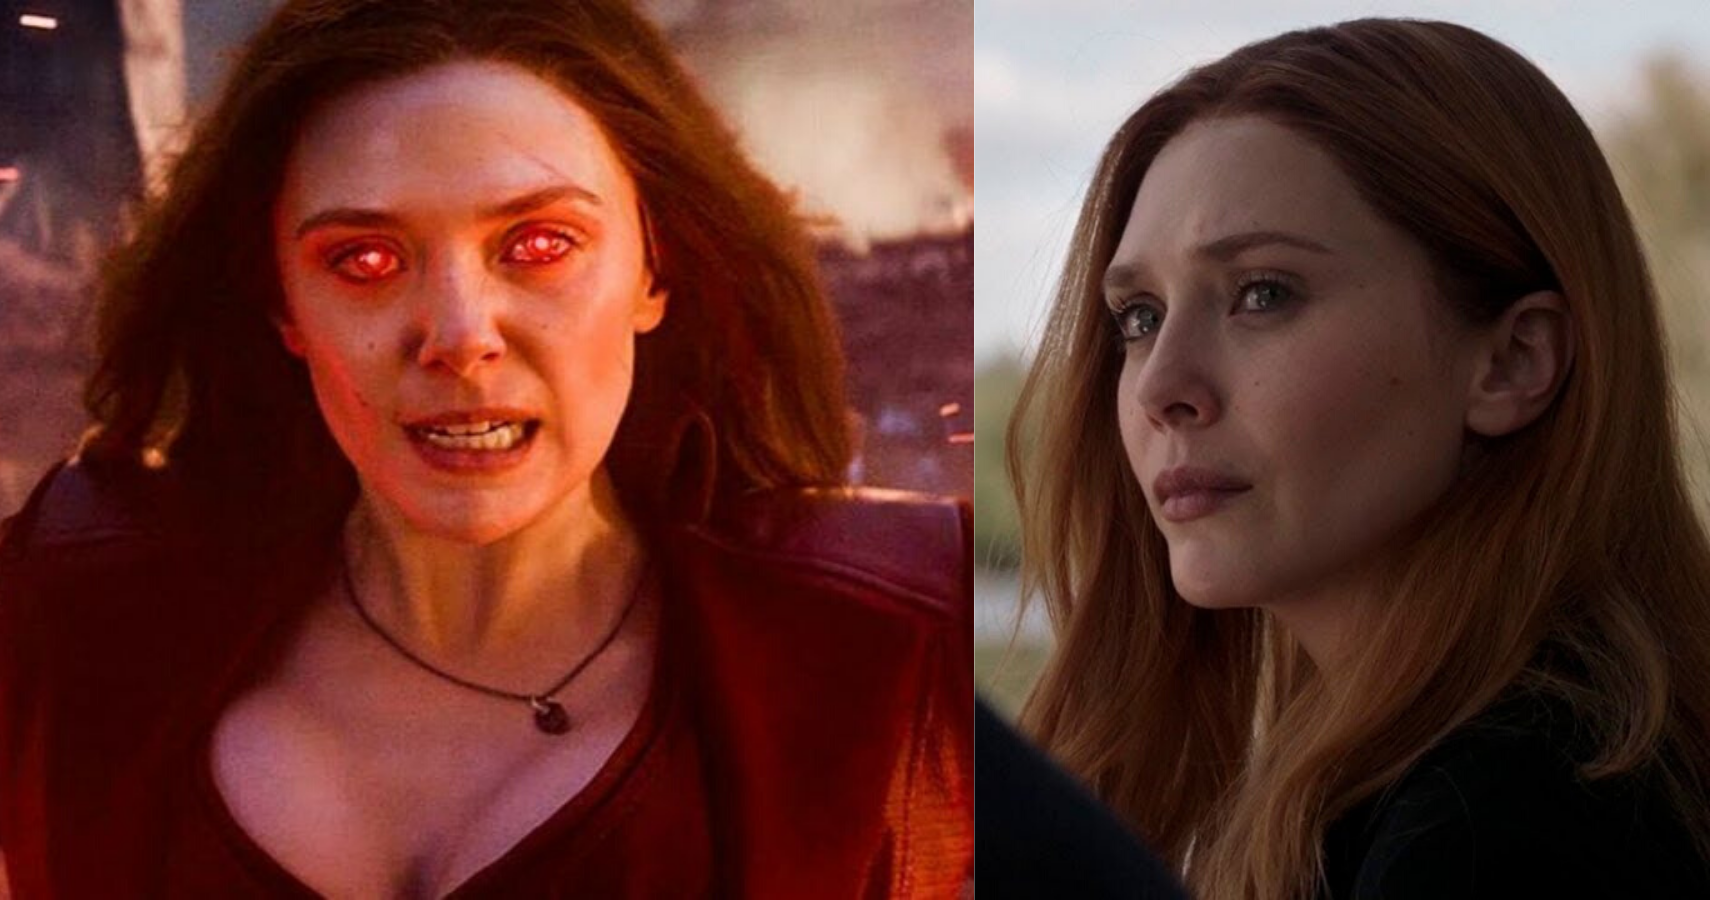 Marvel: 10 Things You Missed About Scarlet Witch In Avengers: Endgame